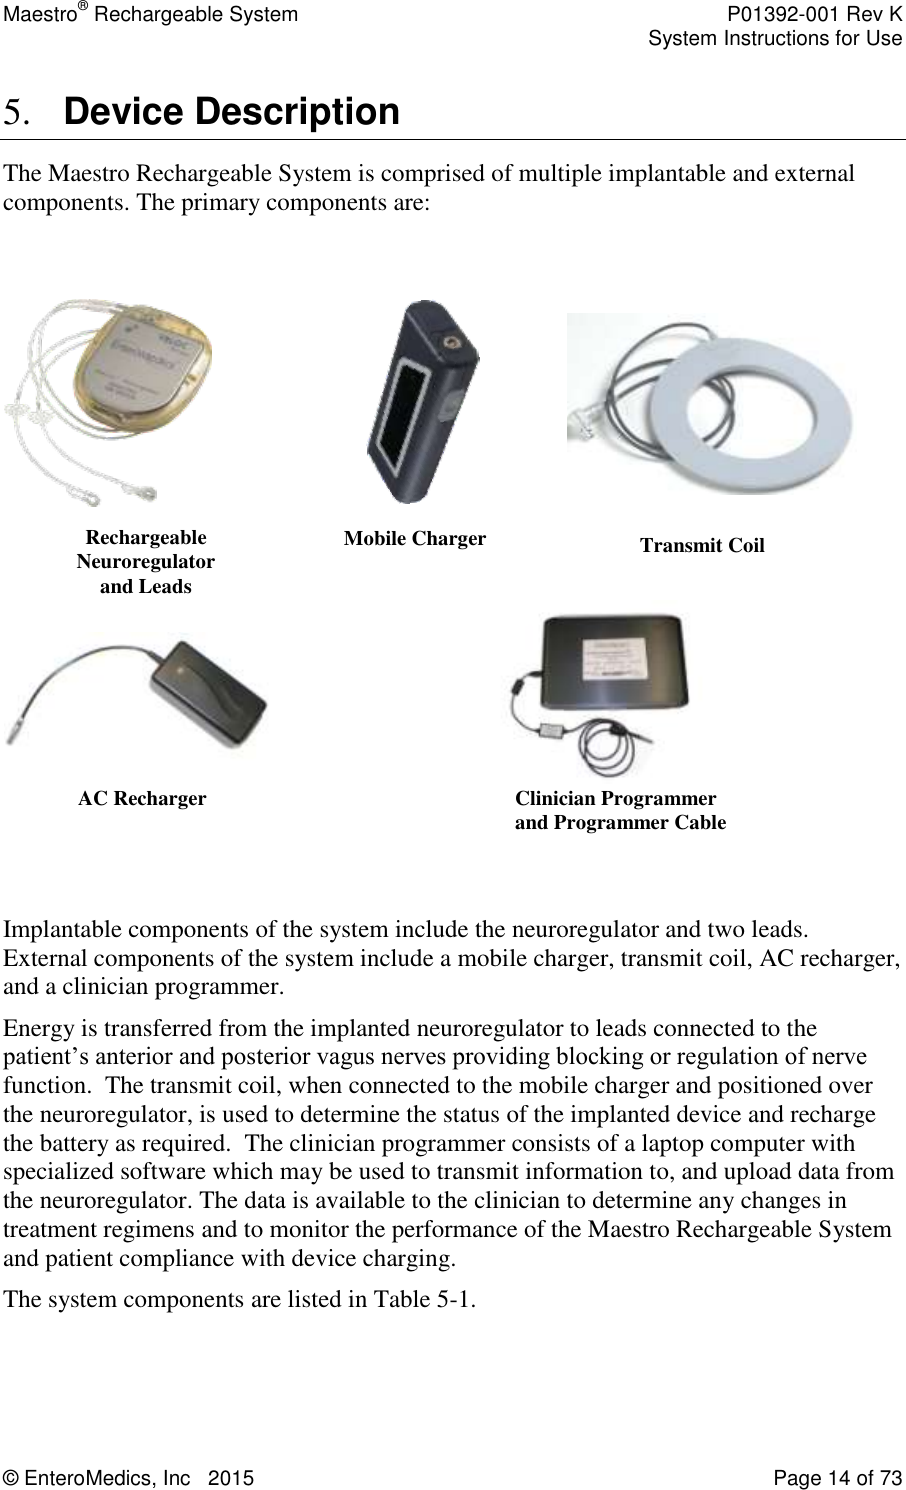 Maestro® Rechargeable System    P01392-001 Rev K     System Instructions for Use  © EnteroMedics, Inc   2015  Page 14 of 73  5. Device Description The Maestro Rechargeable System is comprised of multiple implantable and external components. The primary components are:                                                     Implantable components of the system include the neuroregulator and two leads.  External components of the system include a mobile charger, transmit coil, AC recharger, and a clinician programmer.   Energy is transferred from the implanted neuroregulator to leads connected to the patient’s anterior and posterior vagus nerves providing blocking or regulation of nerve function.  The transmit coil, when connected to the mobile charger and positioned over the neuroregulator, is used to determine the status of the implanted device and recharge the battery as required.  The clinician programmer consists of a laptop computer with specialized software which may be used to transmit information to, and upload data from the neuroregulator. The data is available to the clinician to determine any changes in treatment regimens and to monitor the performance of the Maestro Rechargeable System and patient compliance with device charging. The system components are listed in Table 5-1.   AC Recharger  Mobile Charger  Transmit Coil      Rechargeable Neuroregulator  and Leads Clinician Programmer and Programmer Cable 